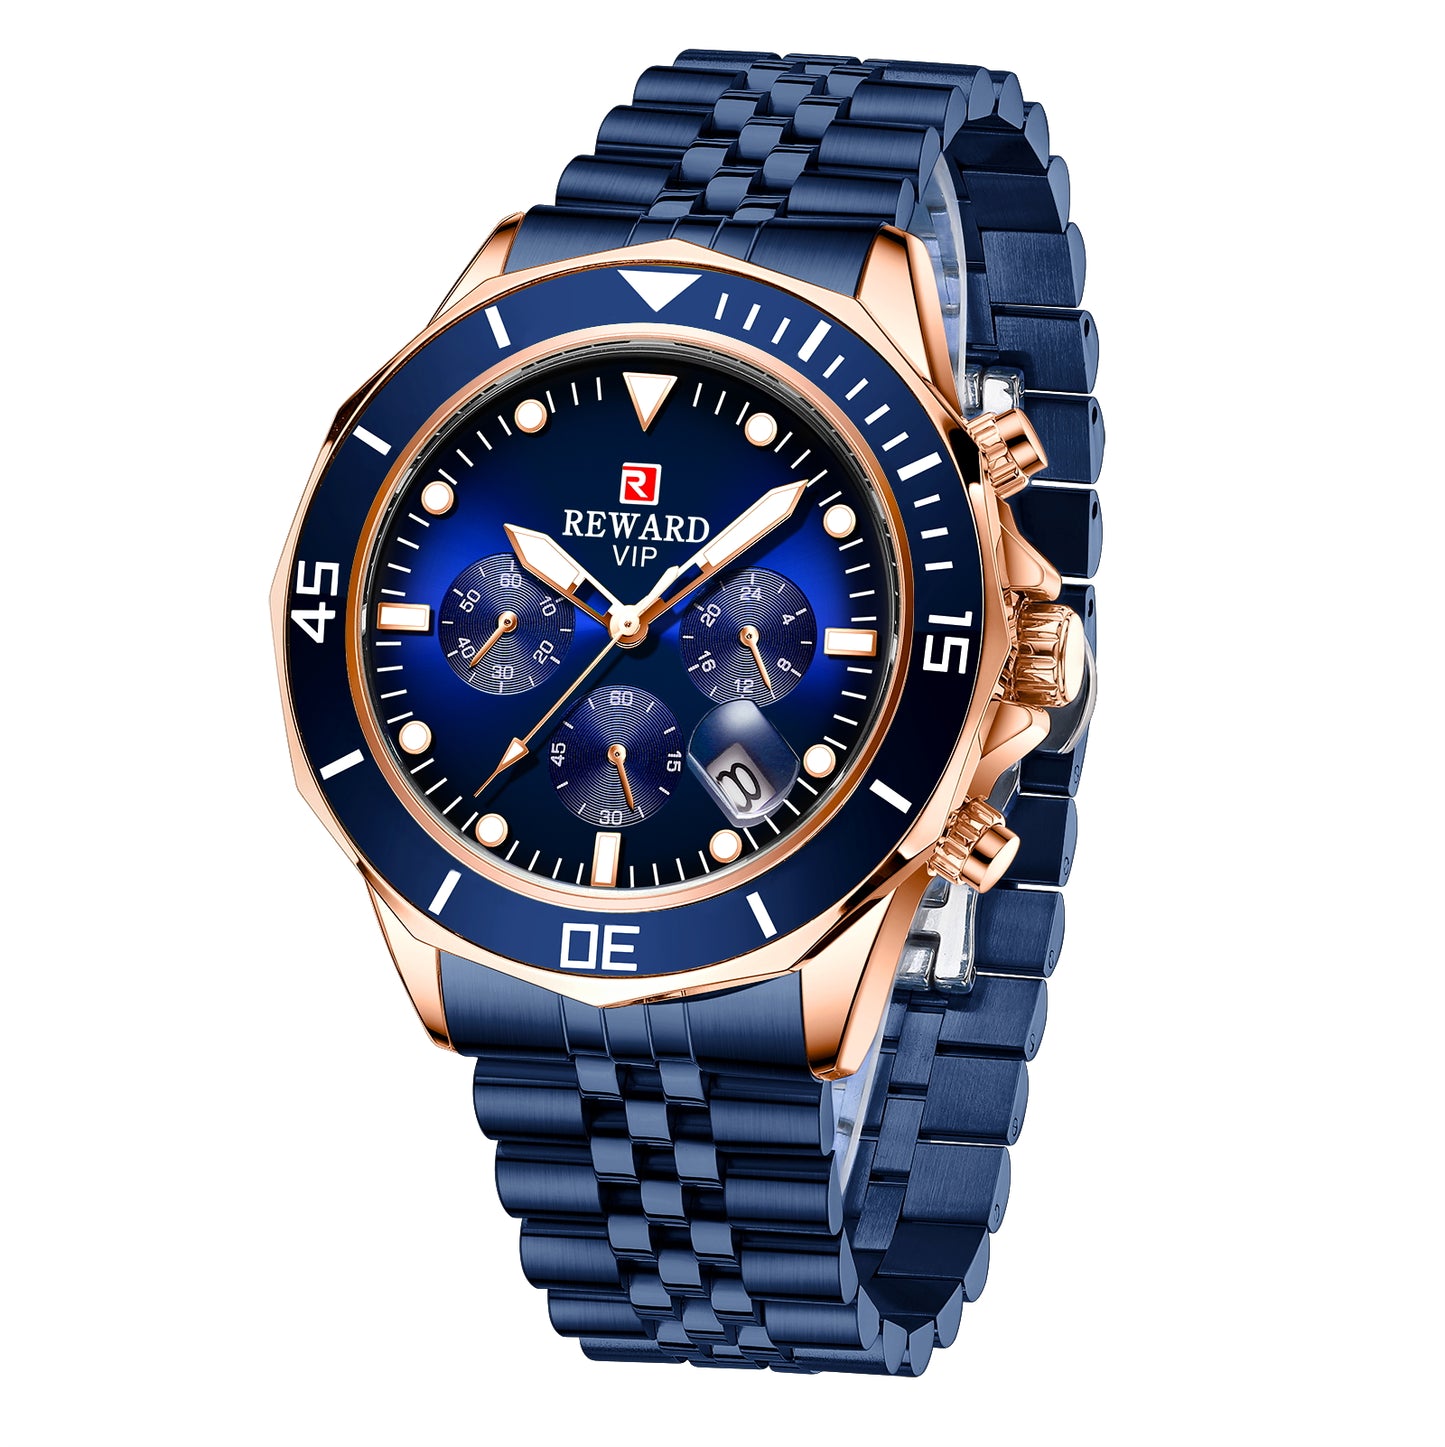 Marina Multifunction Watch Steel, Blue and Pink colour